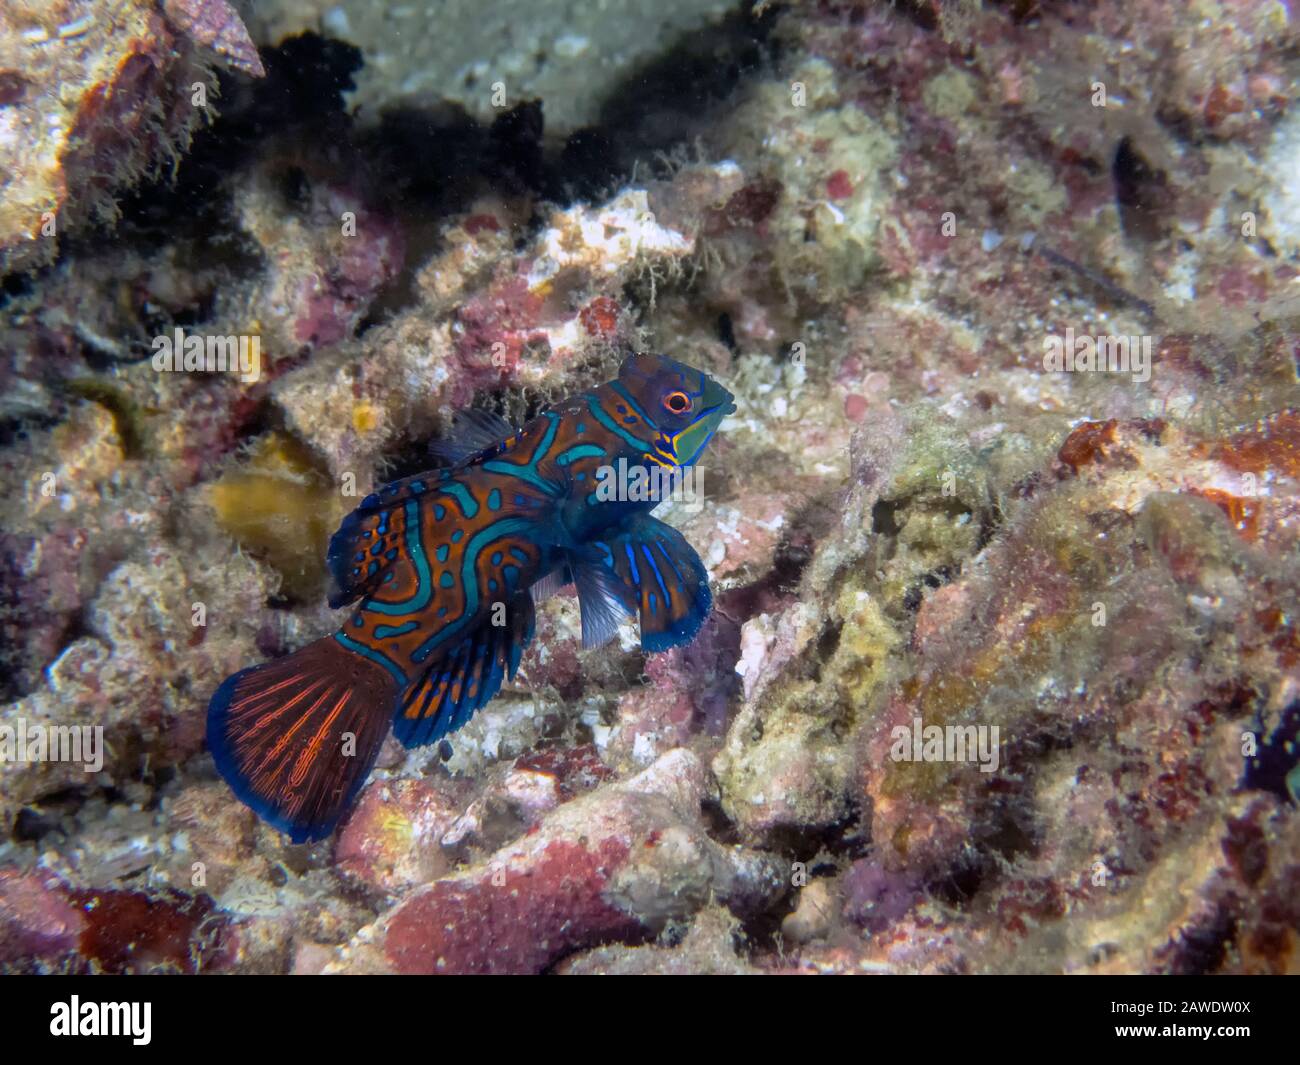 Colourful Madarinfish (Synchiropus splendidus) on a night dive in the Philippines Stock Photo